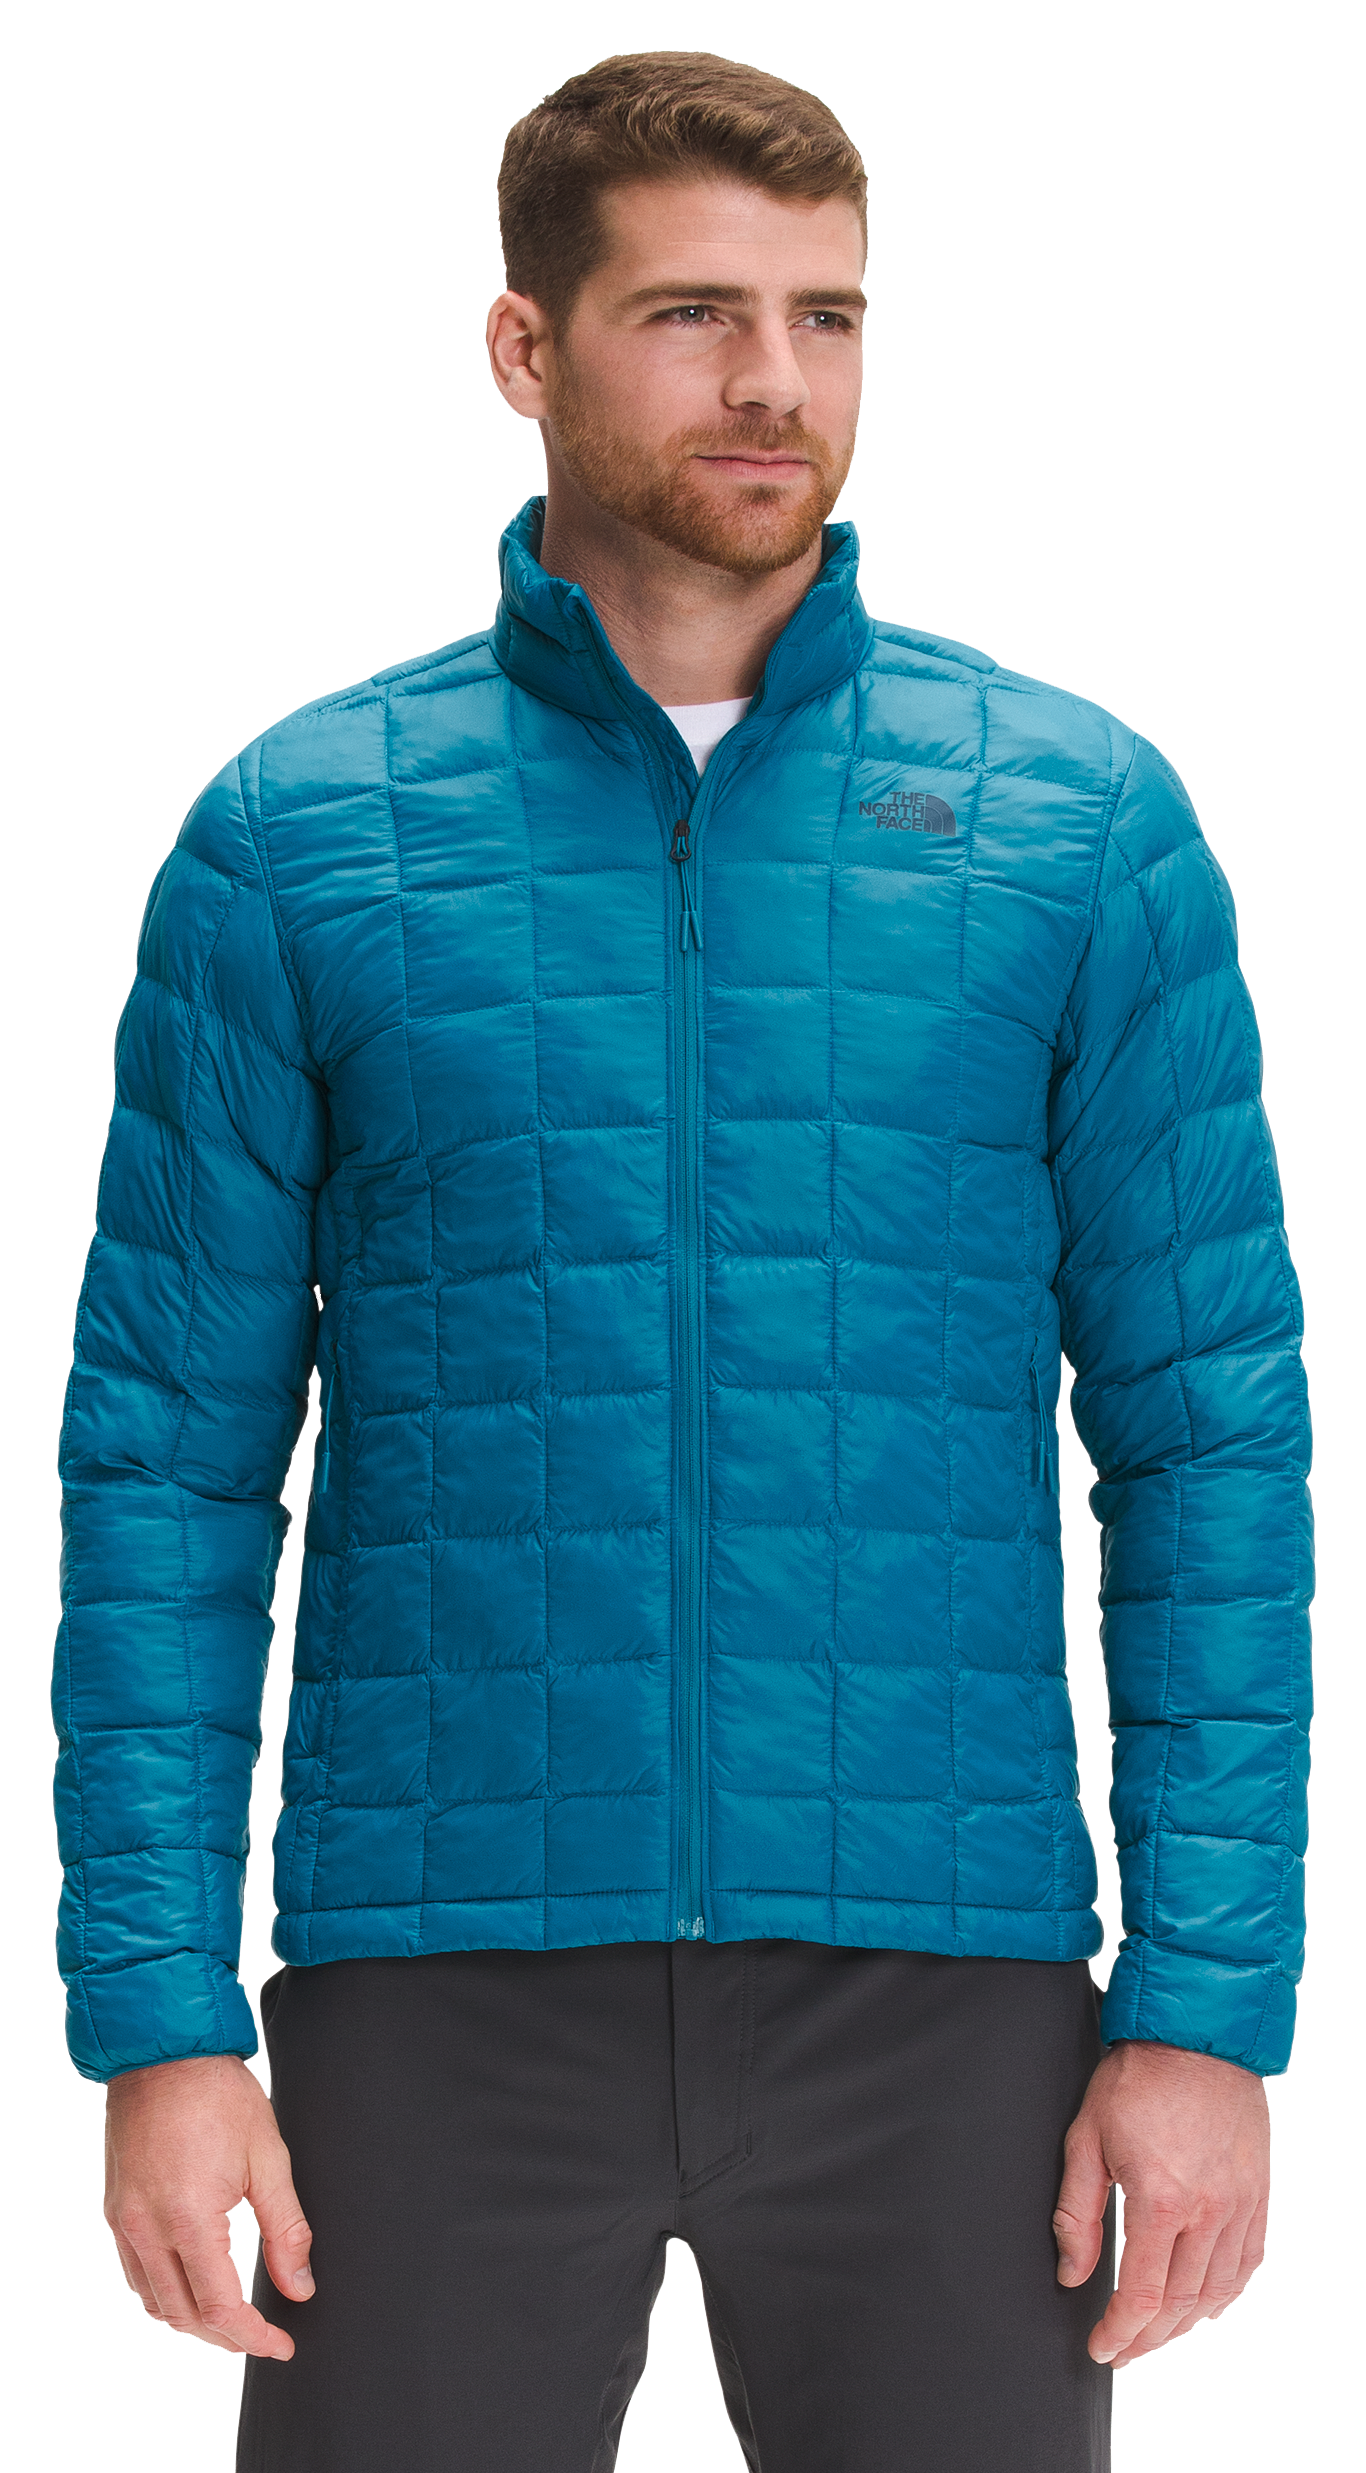 The North Face ThermoBall Eco Quilted Jacket for Men - Banff Blue - L